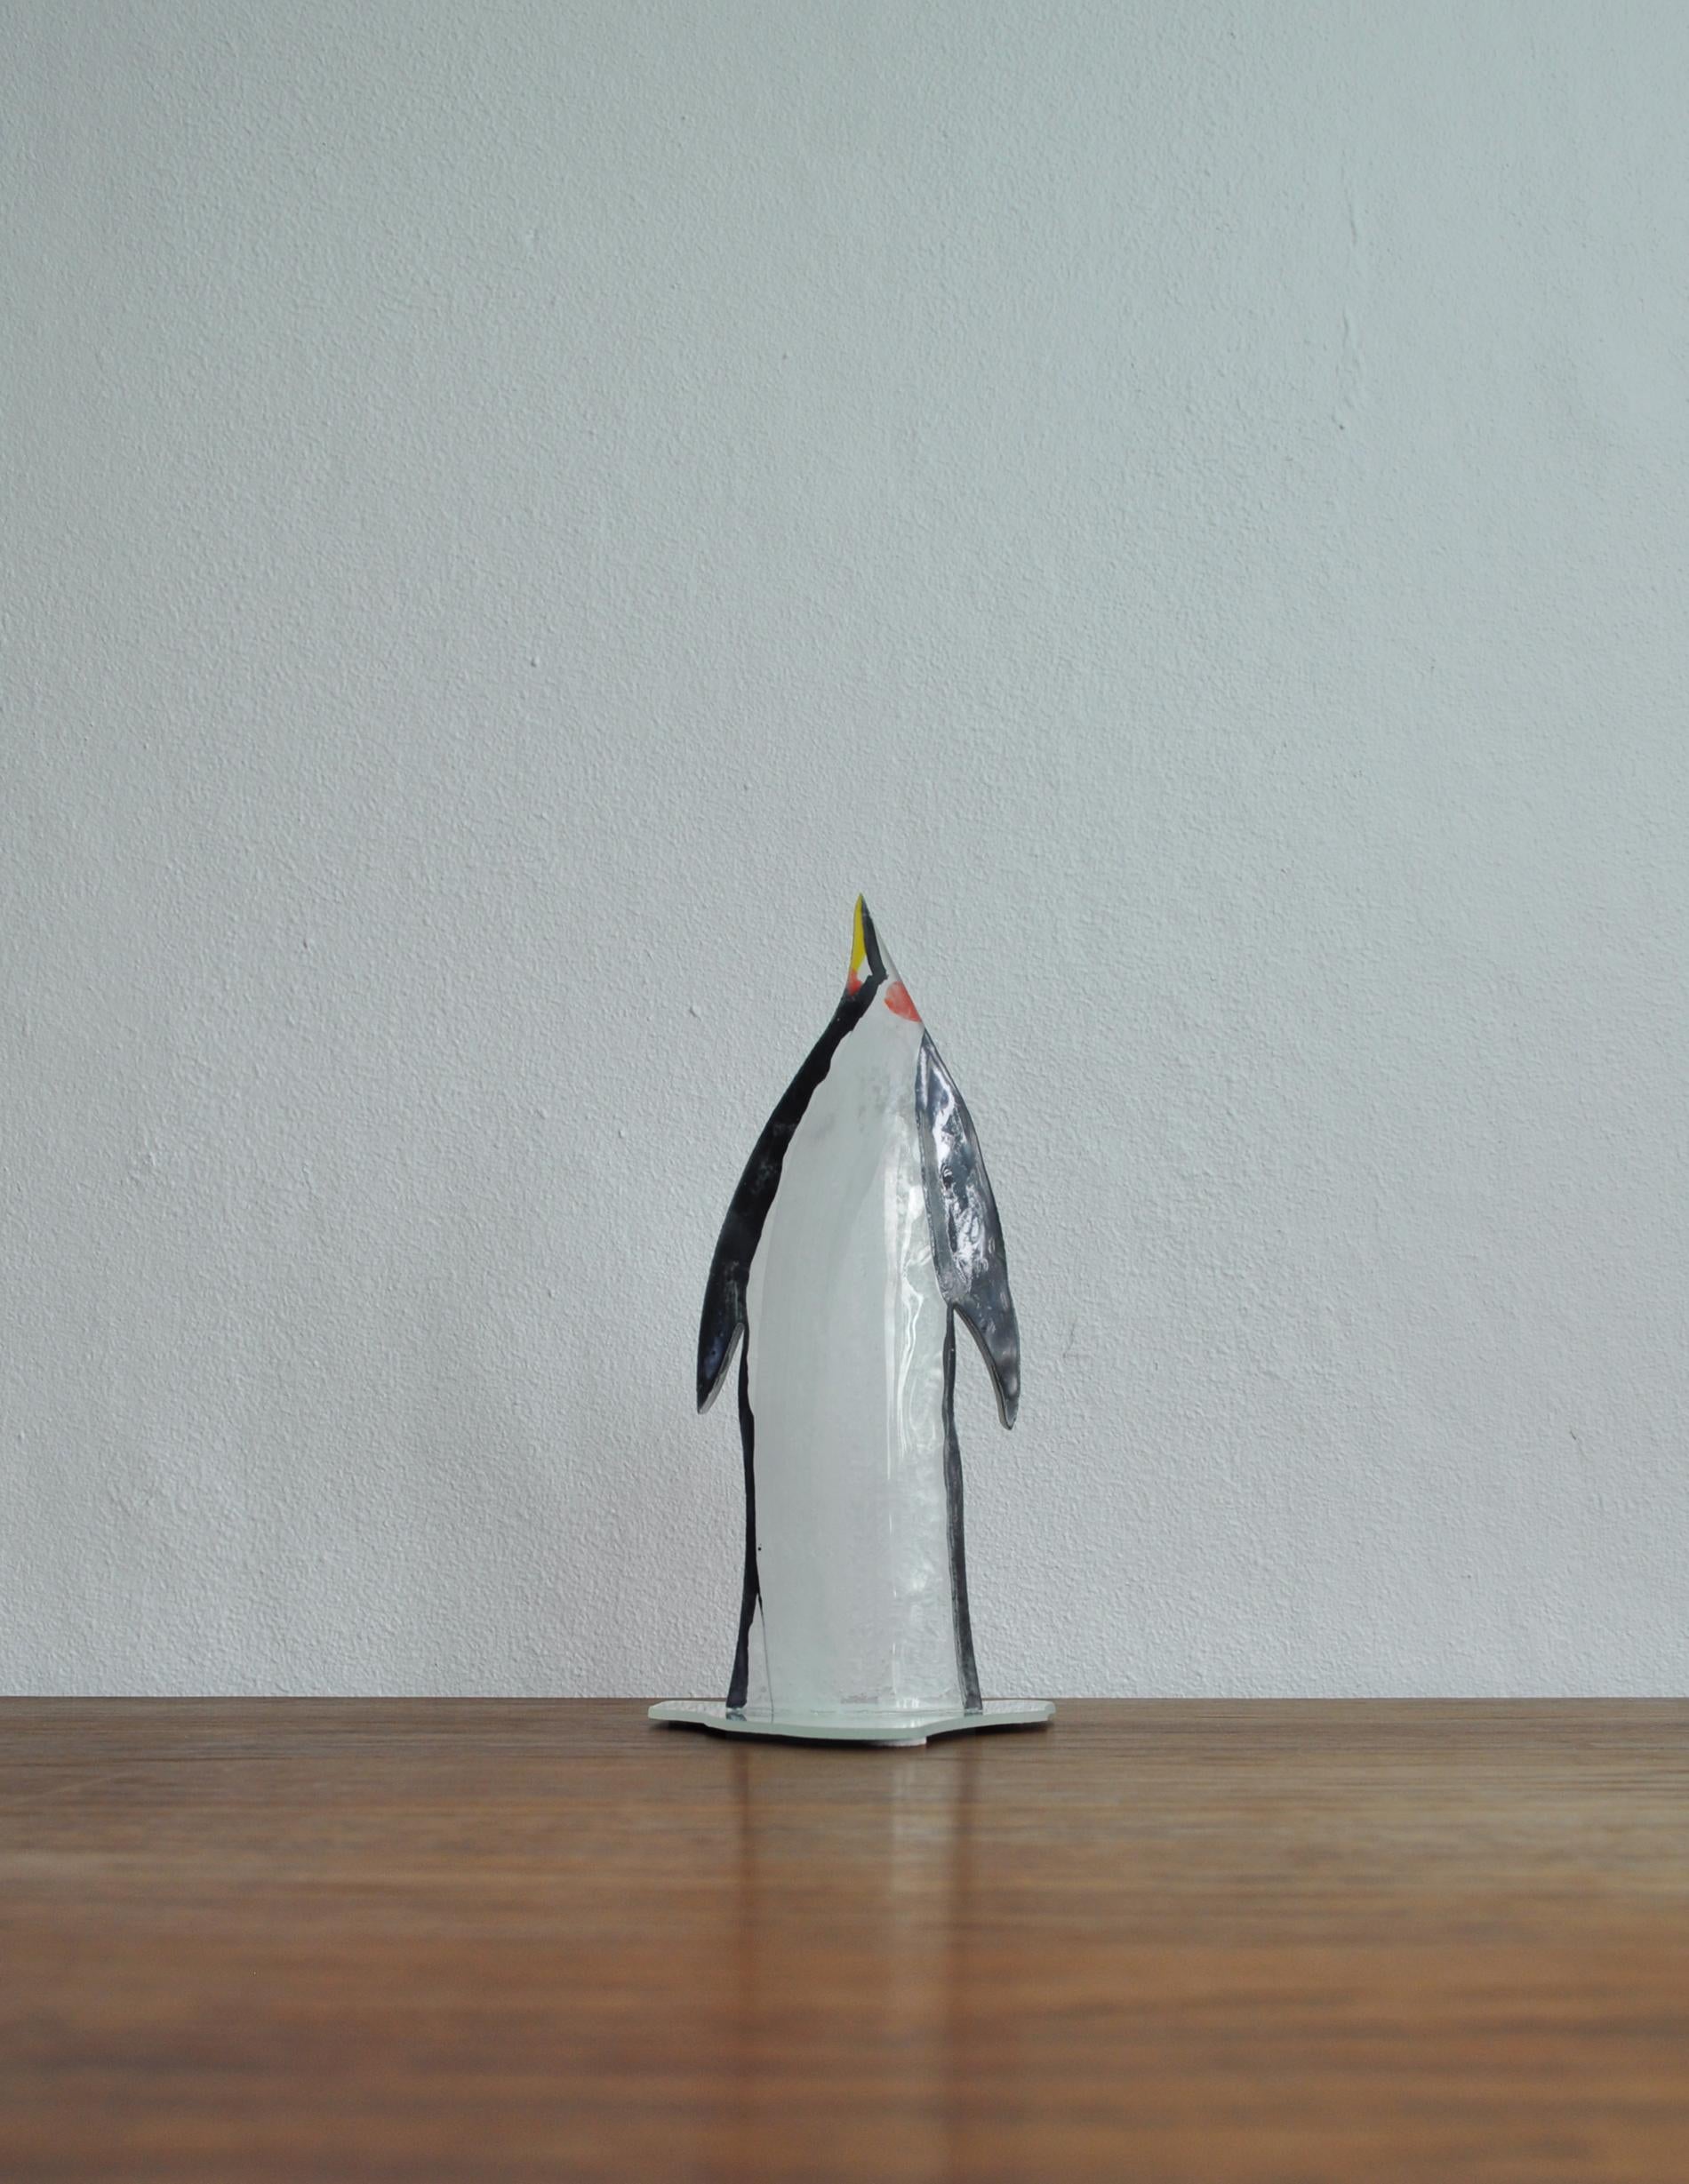 Stained glass pinguin sculpture mounted on mirror base
by the Danish artist Peter Stuhr.
Measures: H 16 cm x W 7.5 cm x D 6 cm

Peter Stuhr's paintings consist of an expressive picture universe made up of streams of sieving color and transparent